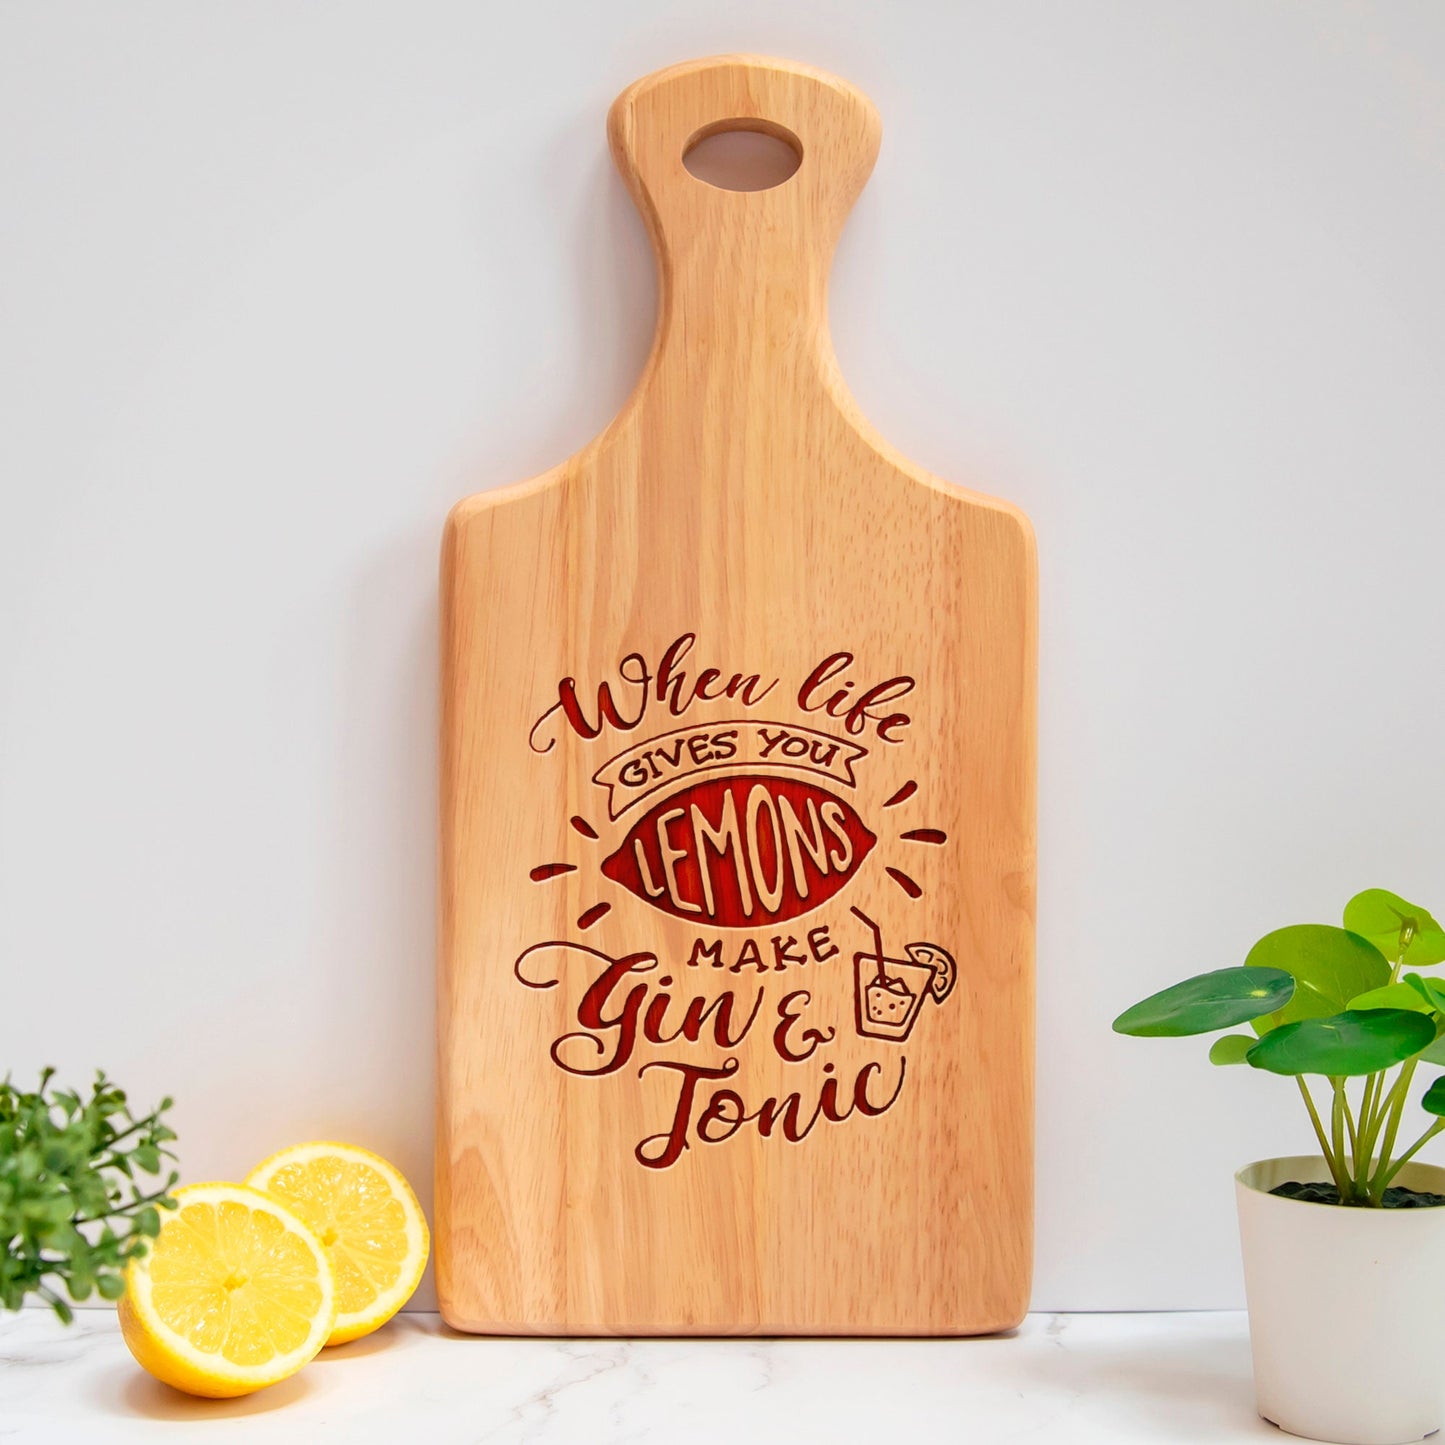 Gin and Tonic Paddle Chopping Board Gift, When Life Gives you Lemons Make Gin and Tonic